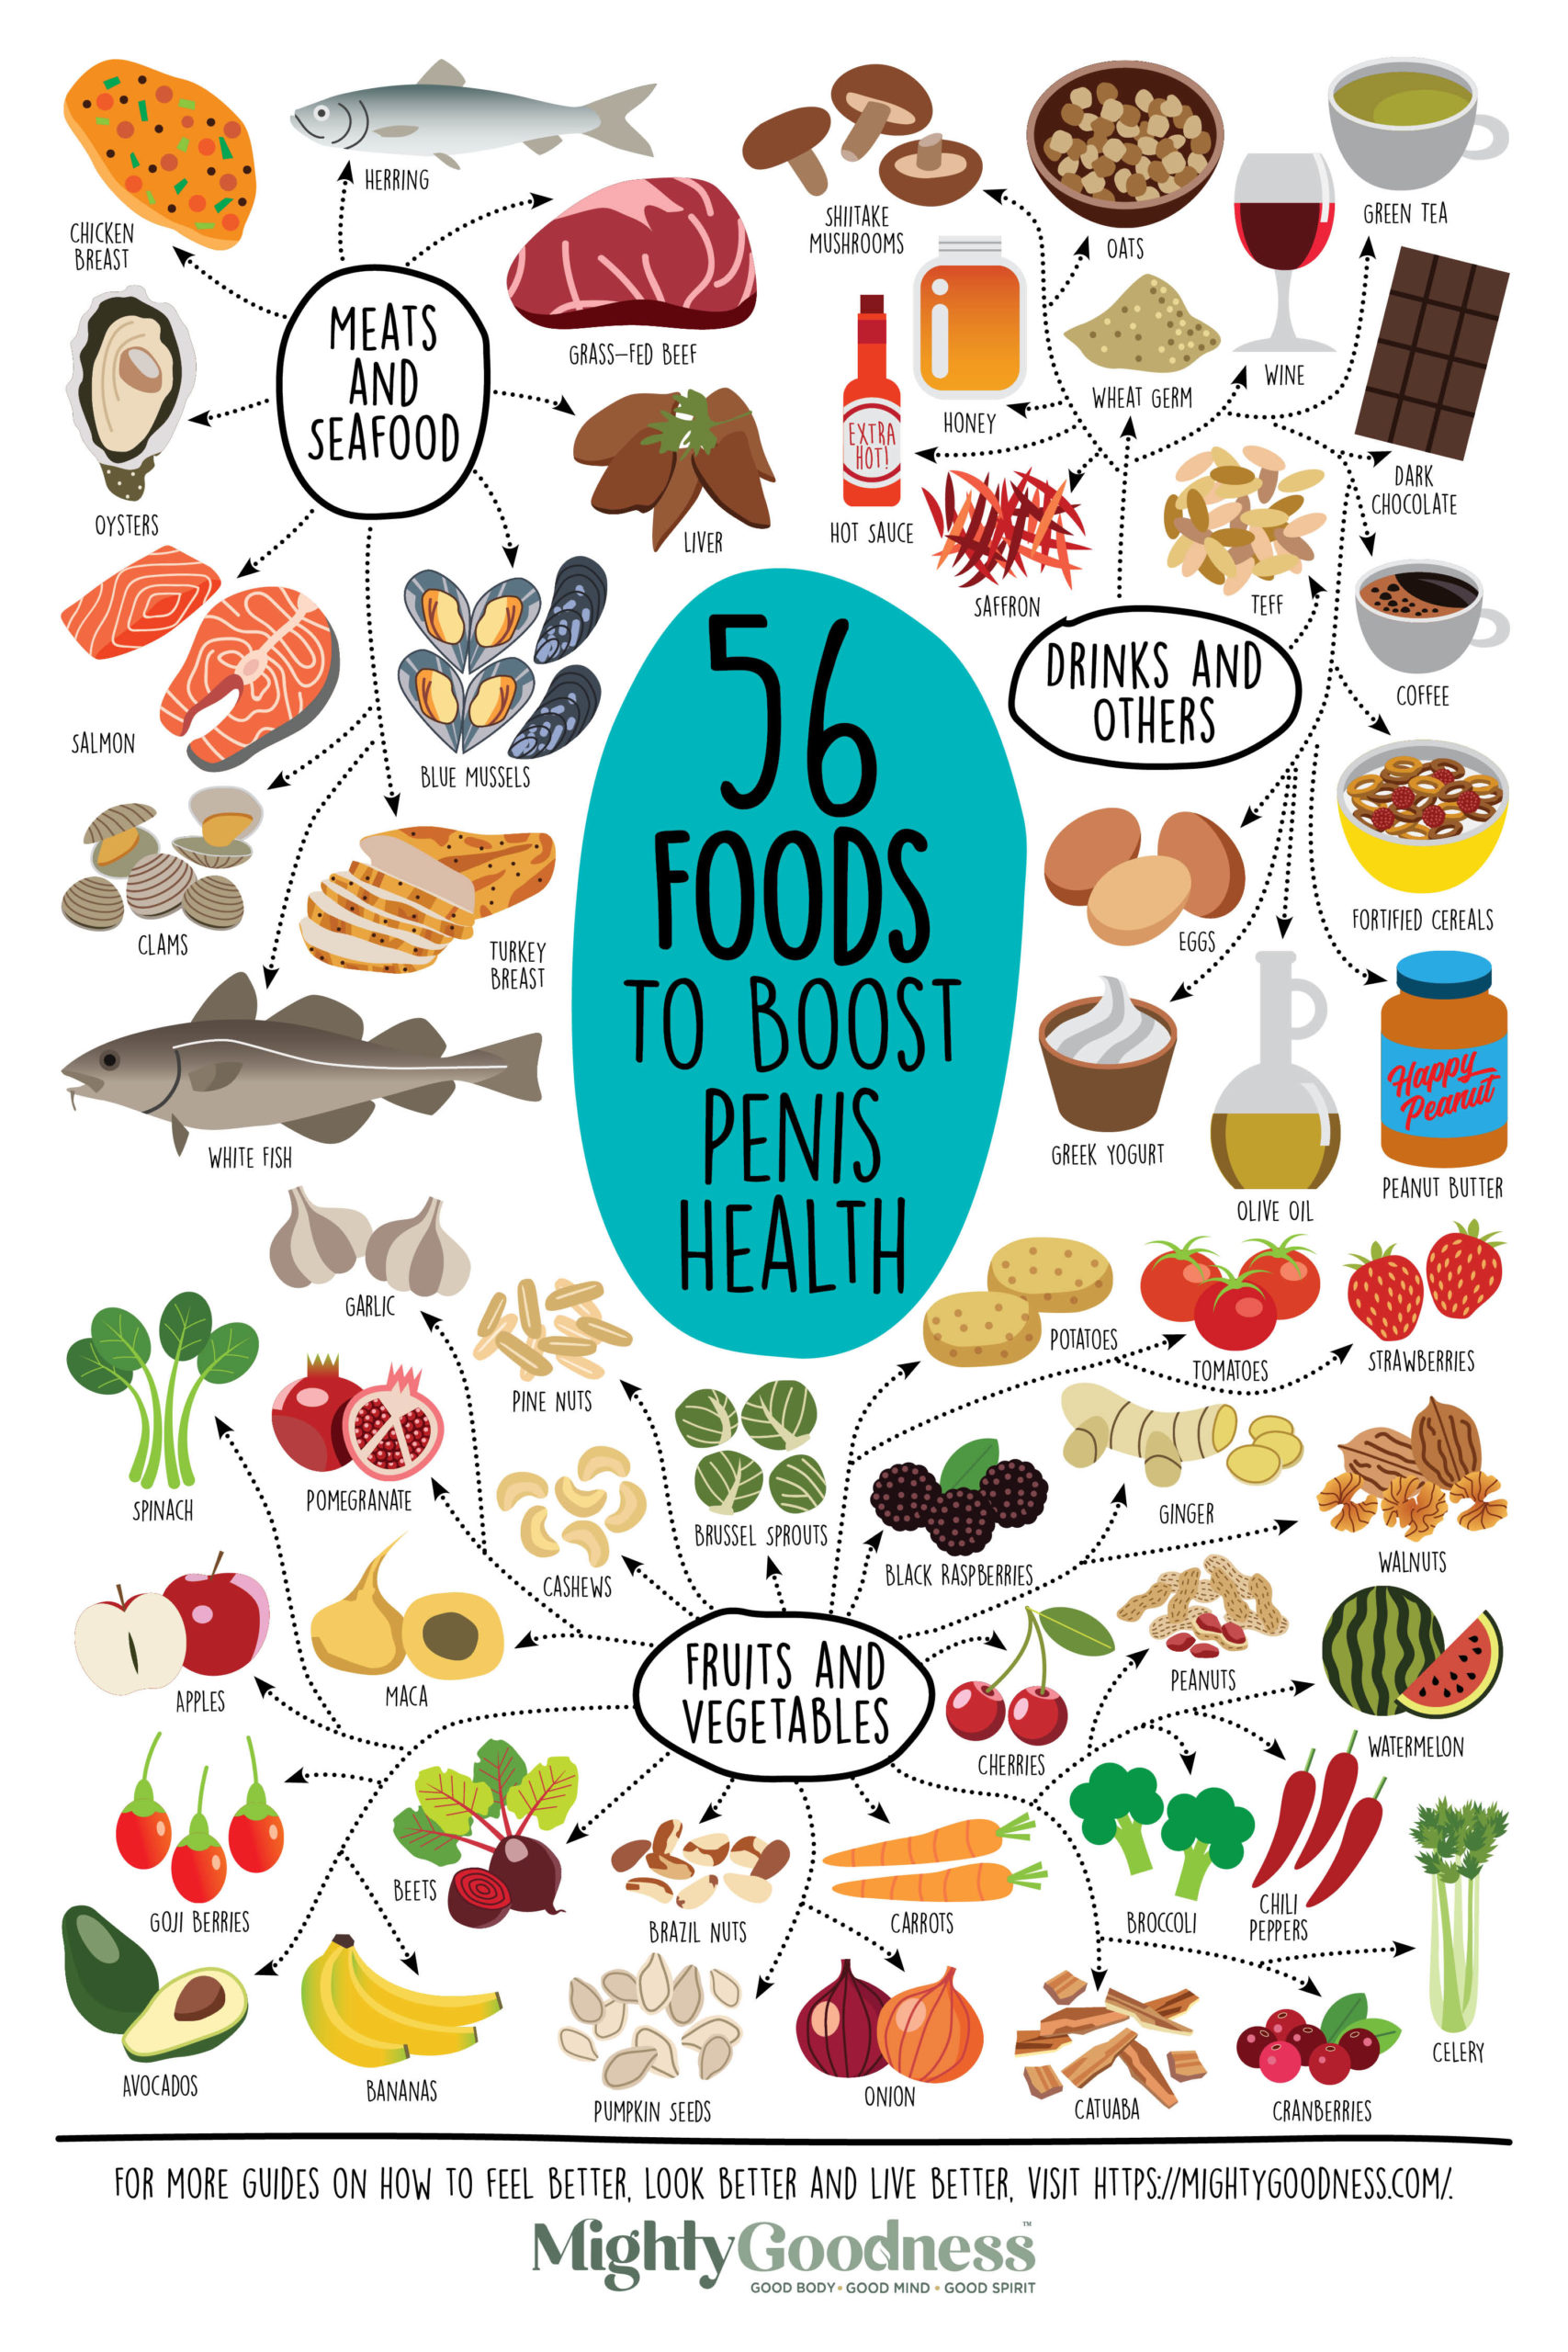 56 Foods To Boost Penis Health scaled